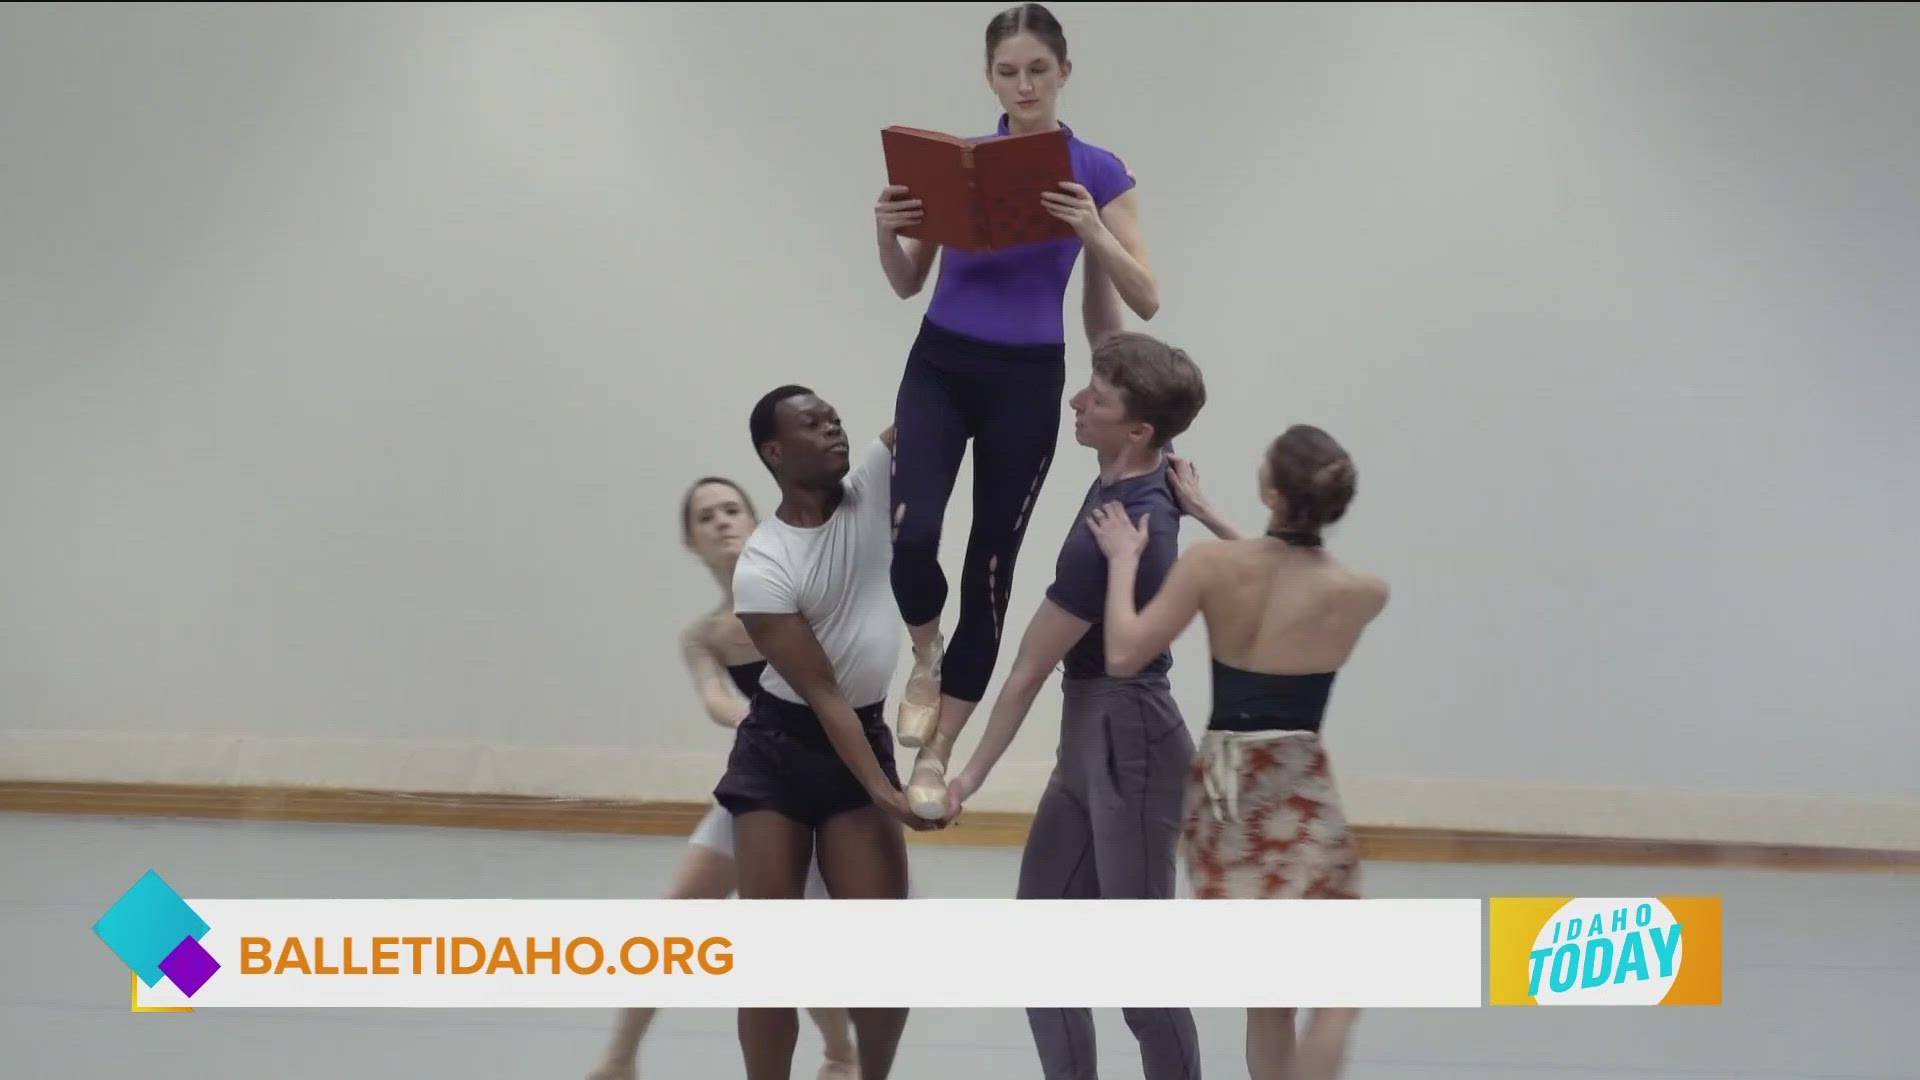 Ballet Idaho offers summer programs for all kids ages.